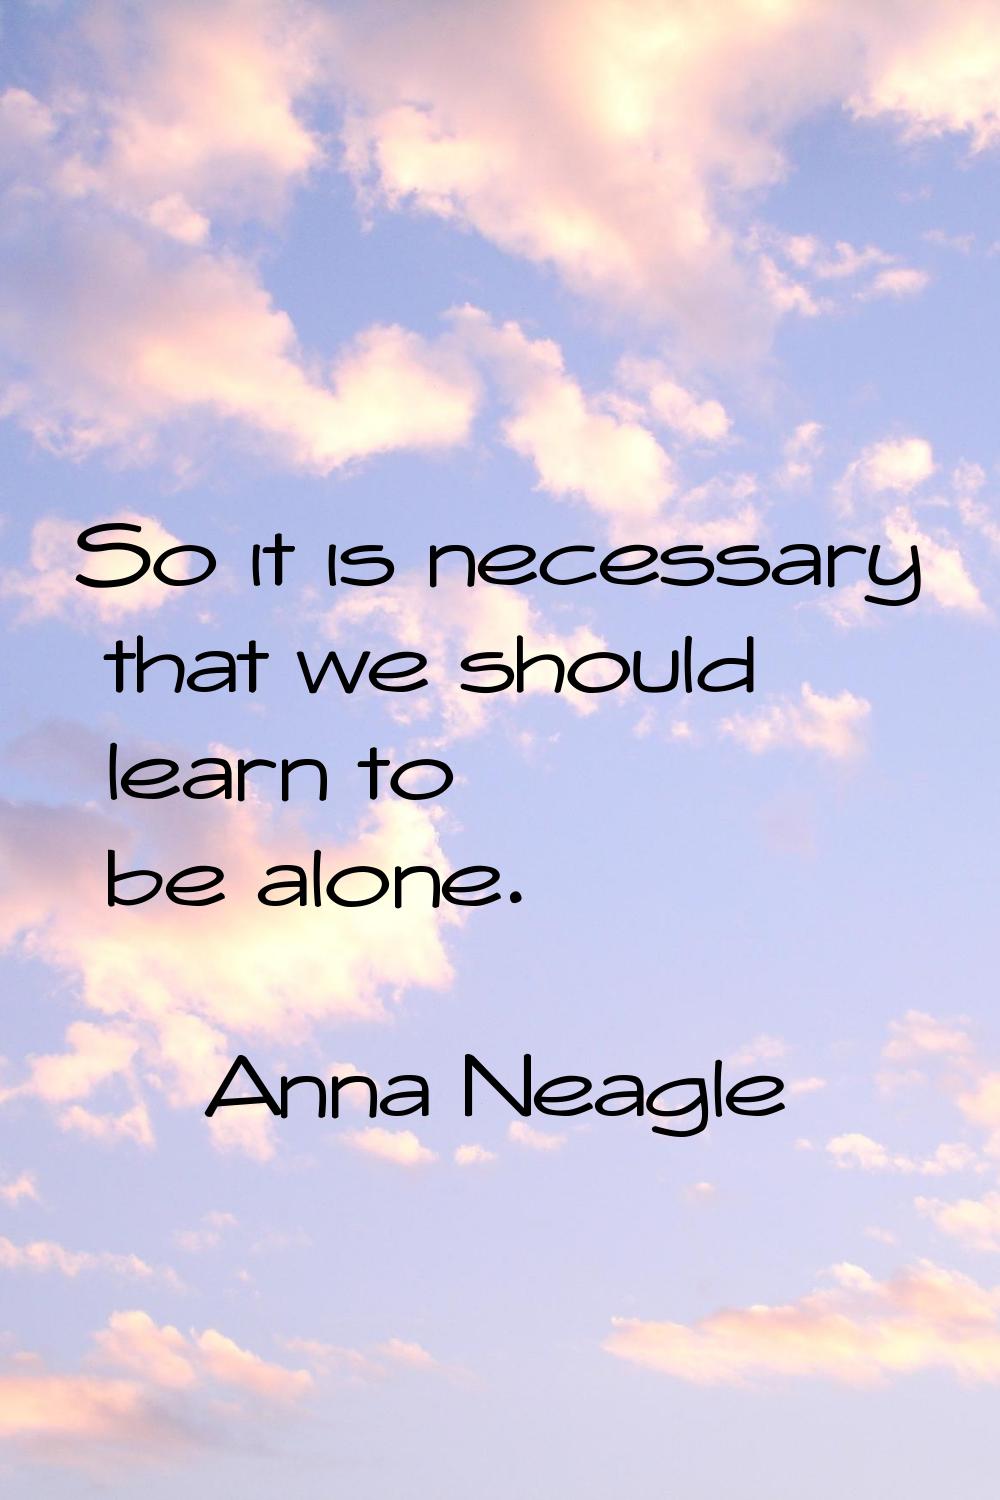 So it is necessary that we should learn to be alone.